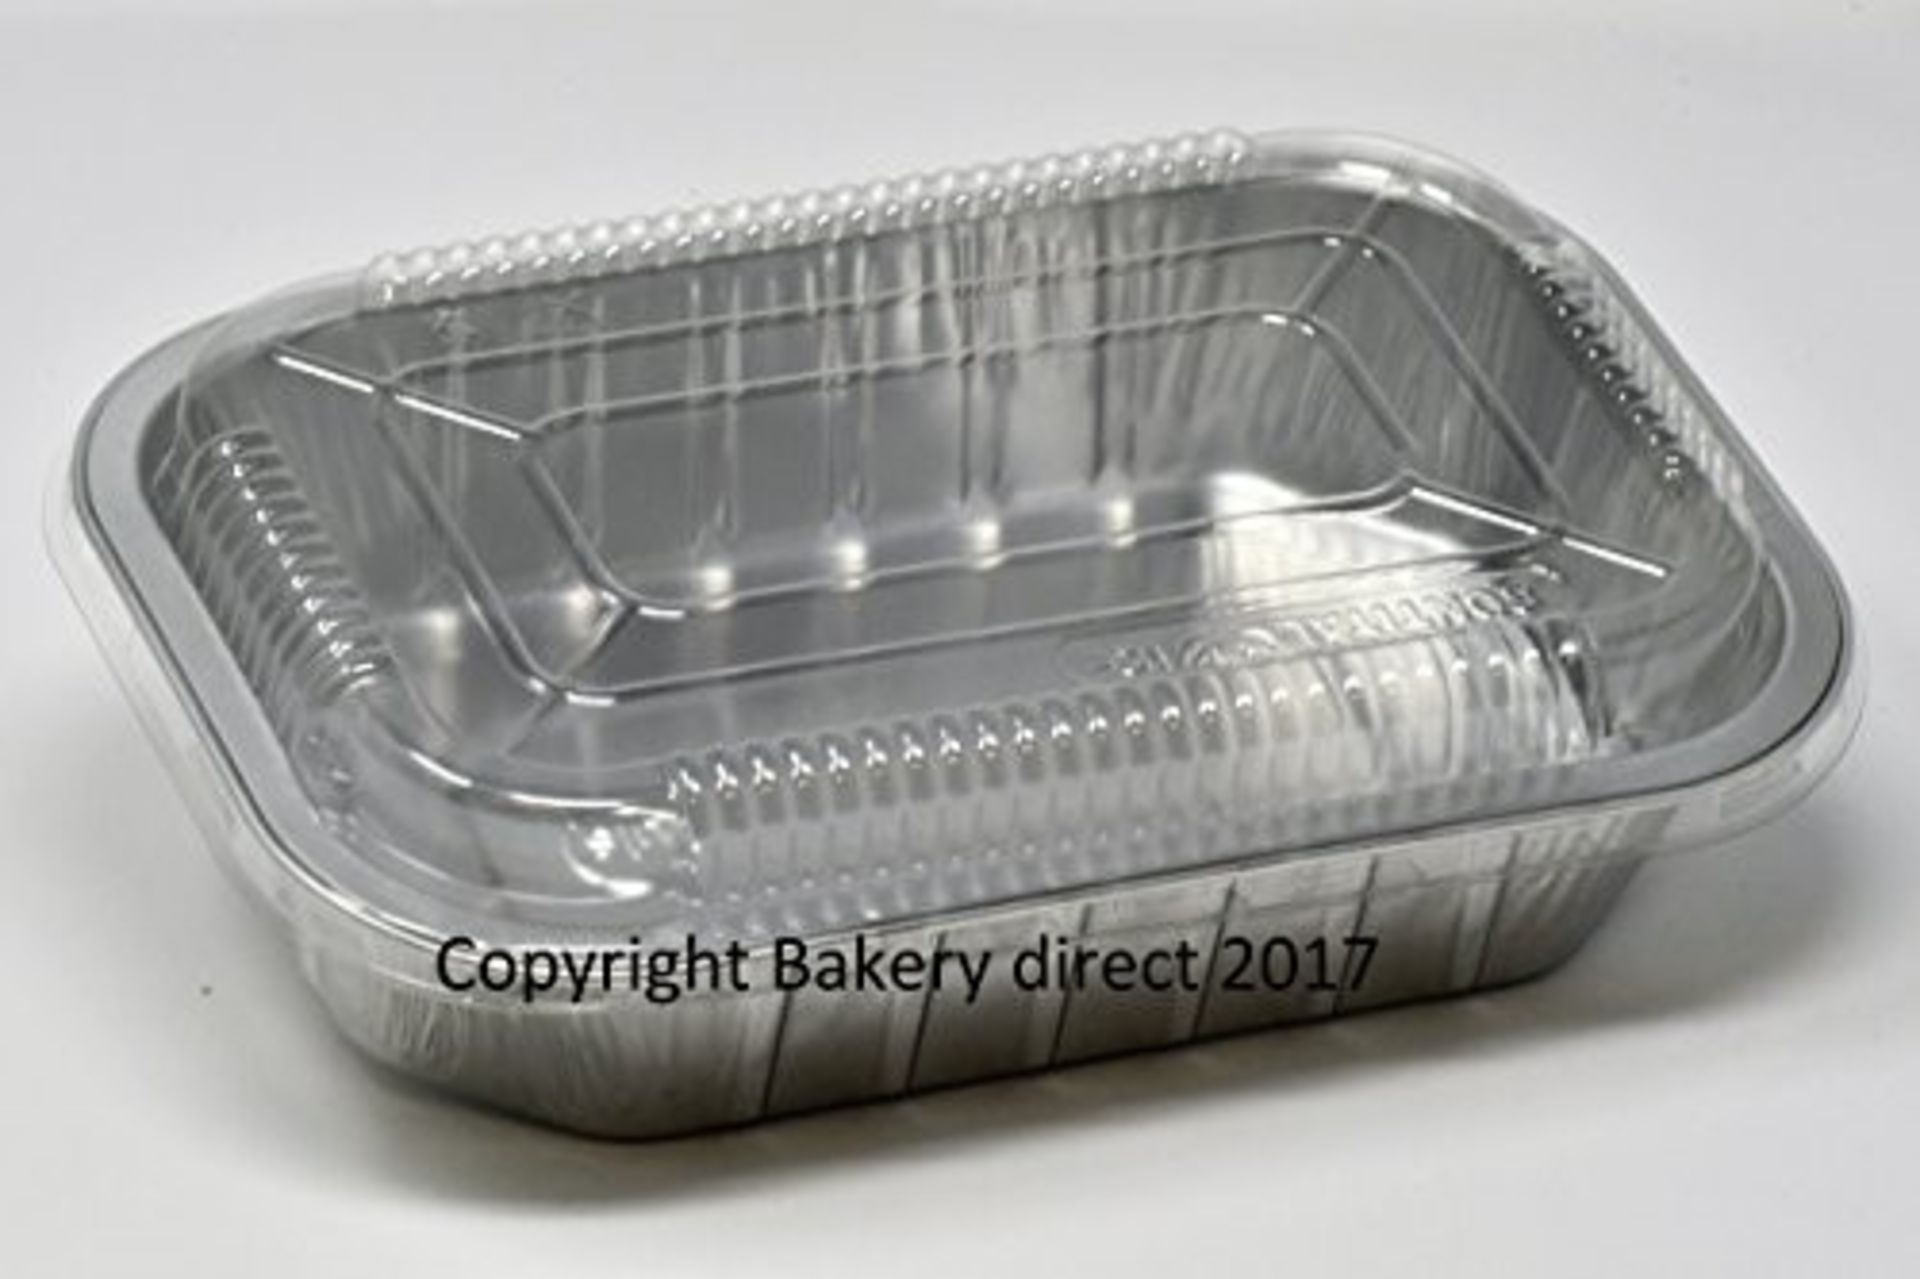 Bakery direct-25 Aluminium- Foil- Strong Disposable Baking Tray Loaf Dish Complete wit